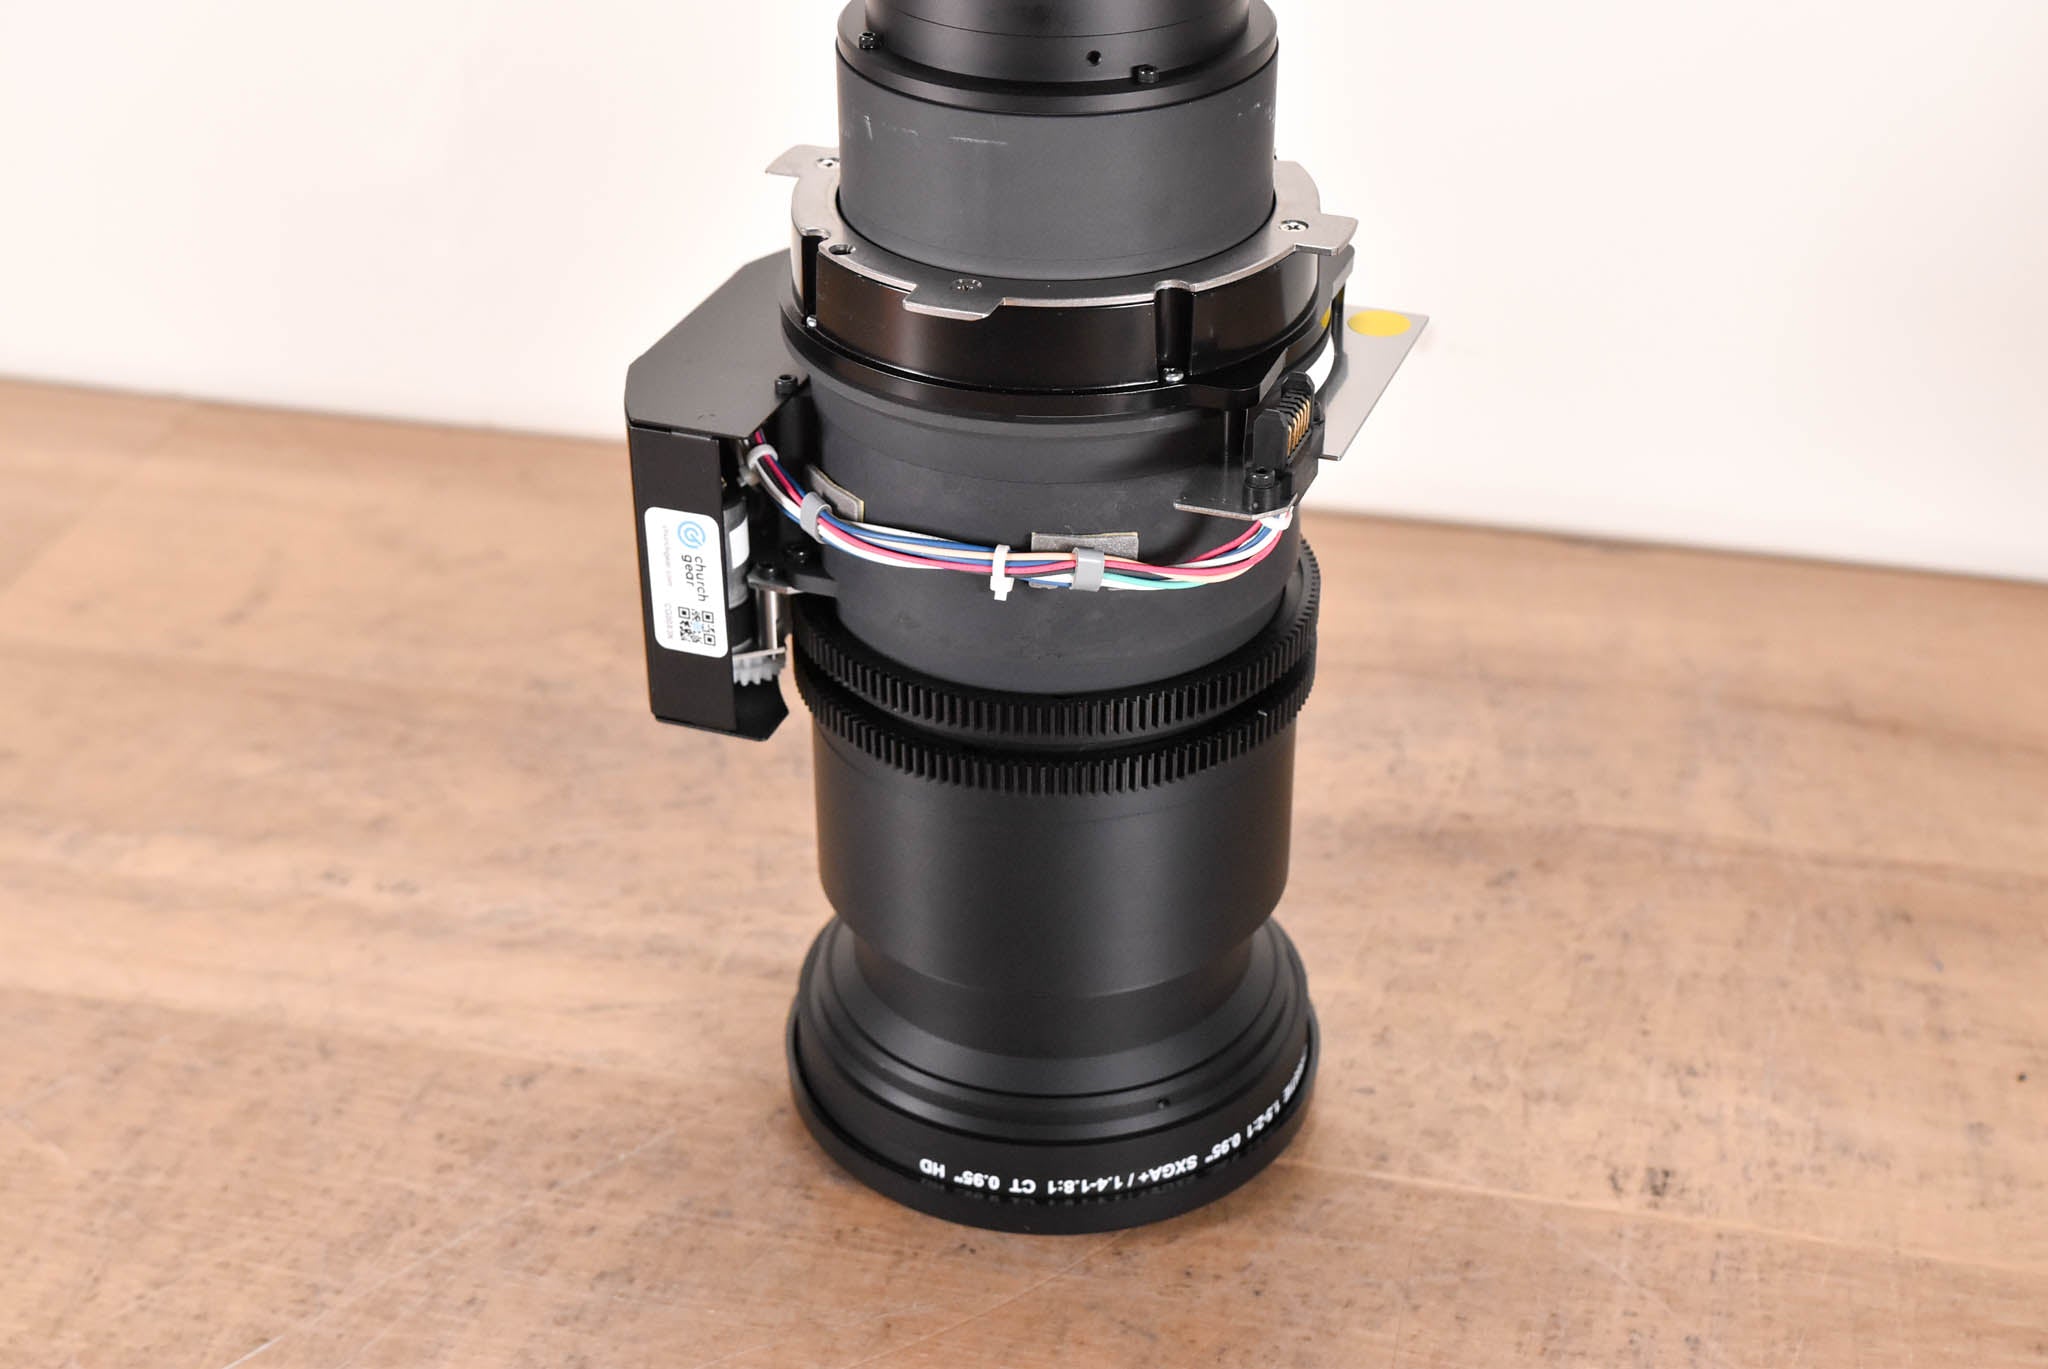 Christie 1.4-1.8:1 CT 0.95 HD Projector Zoom Lens